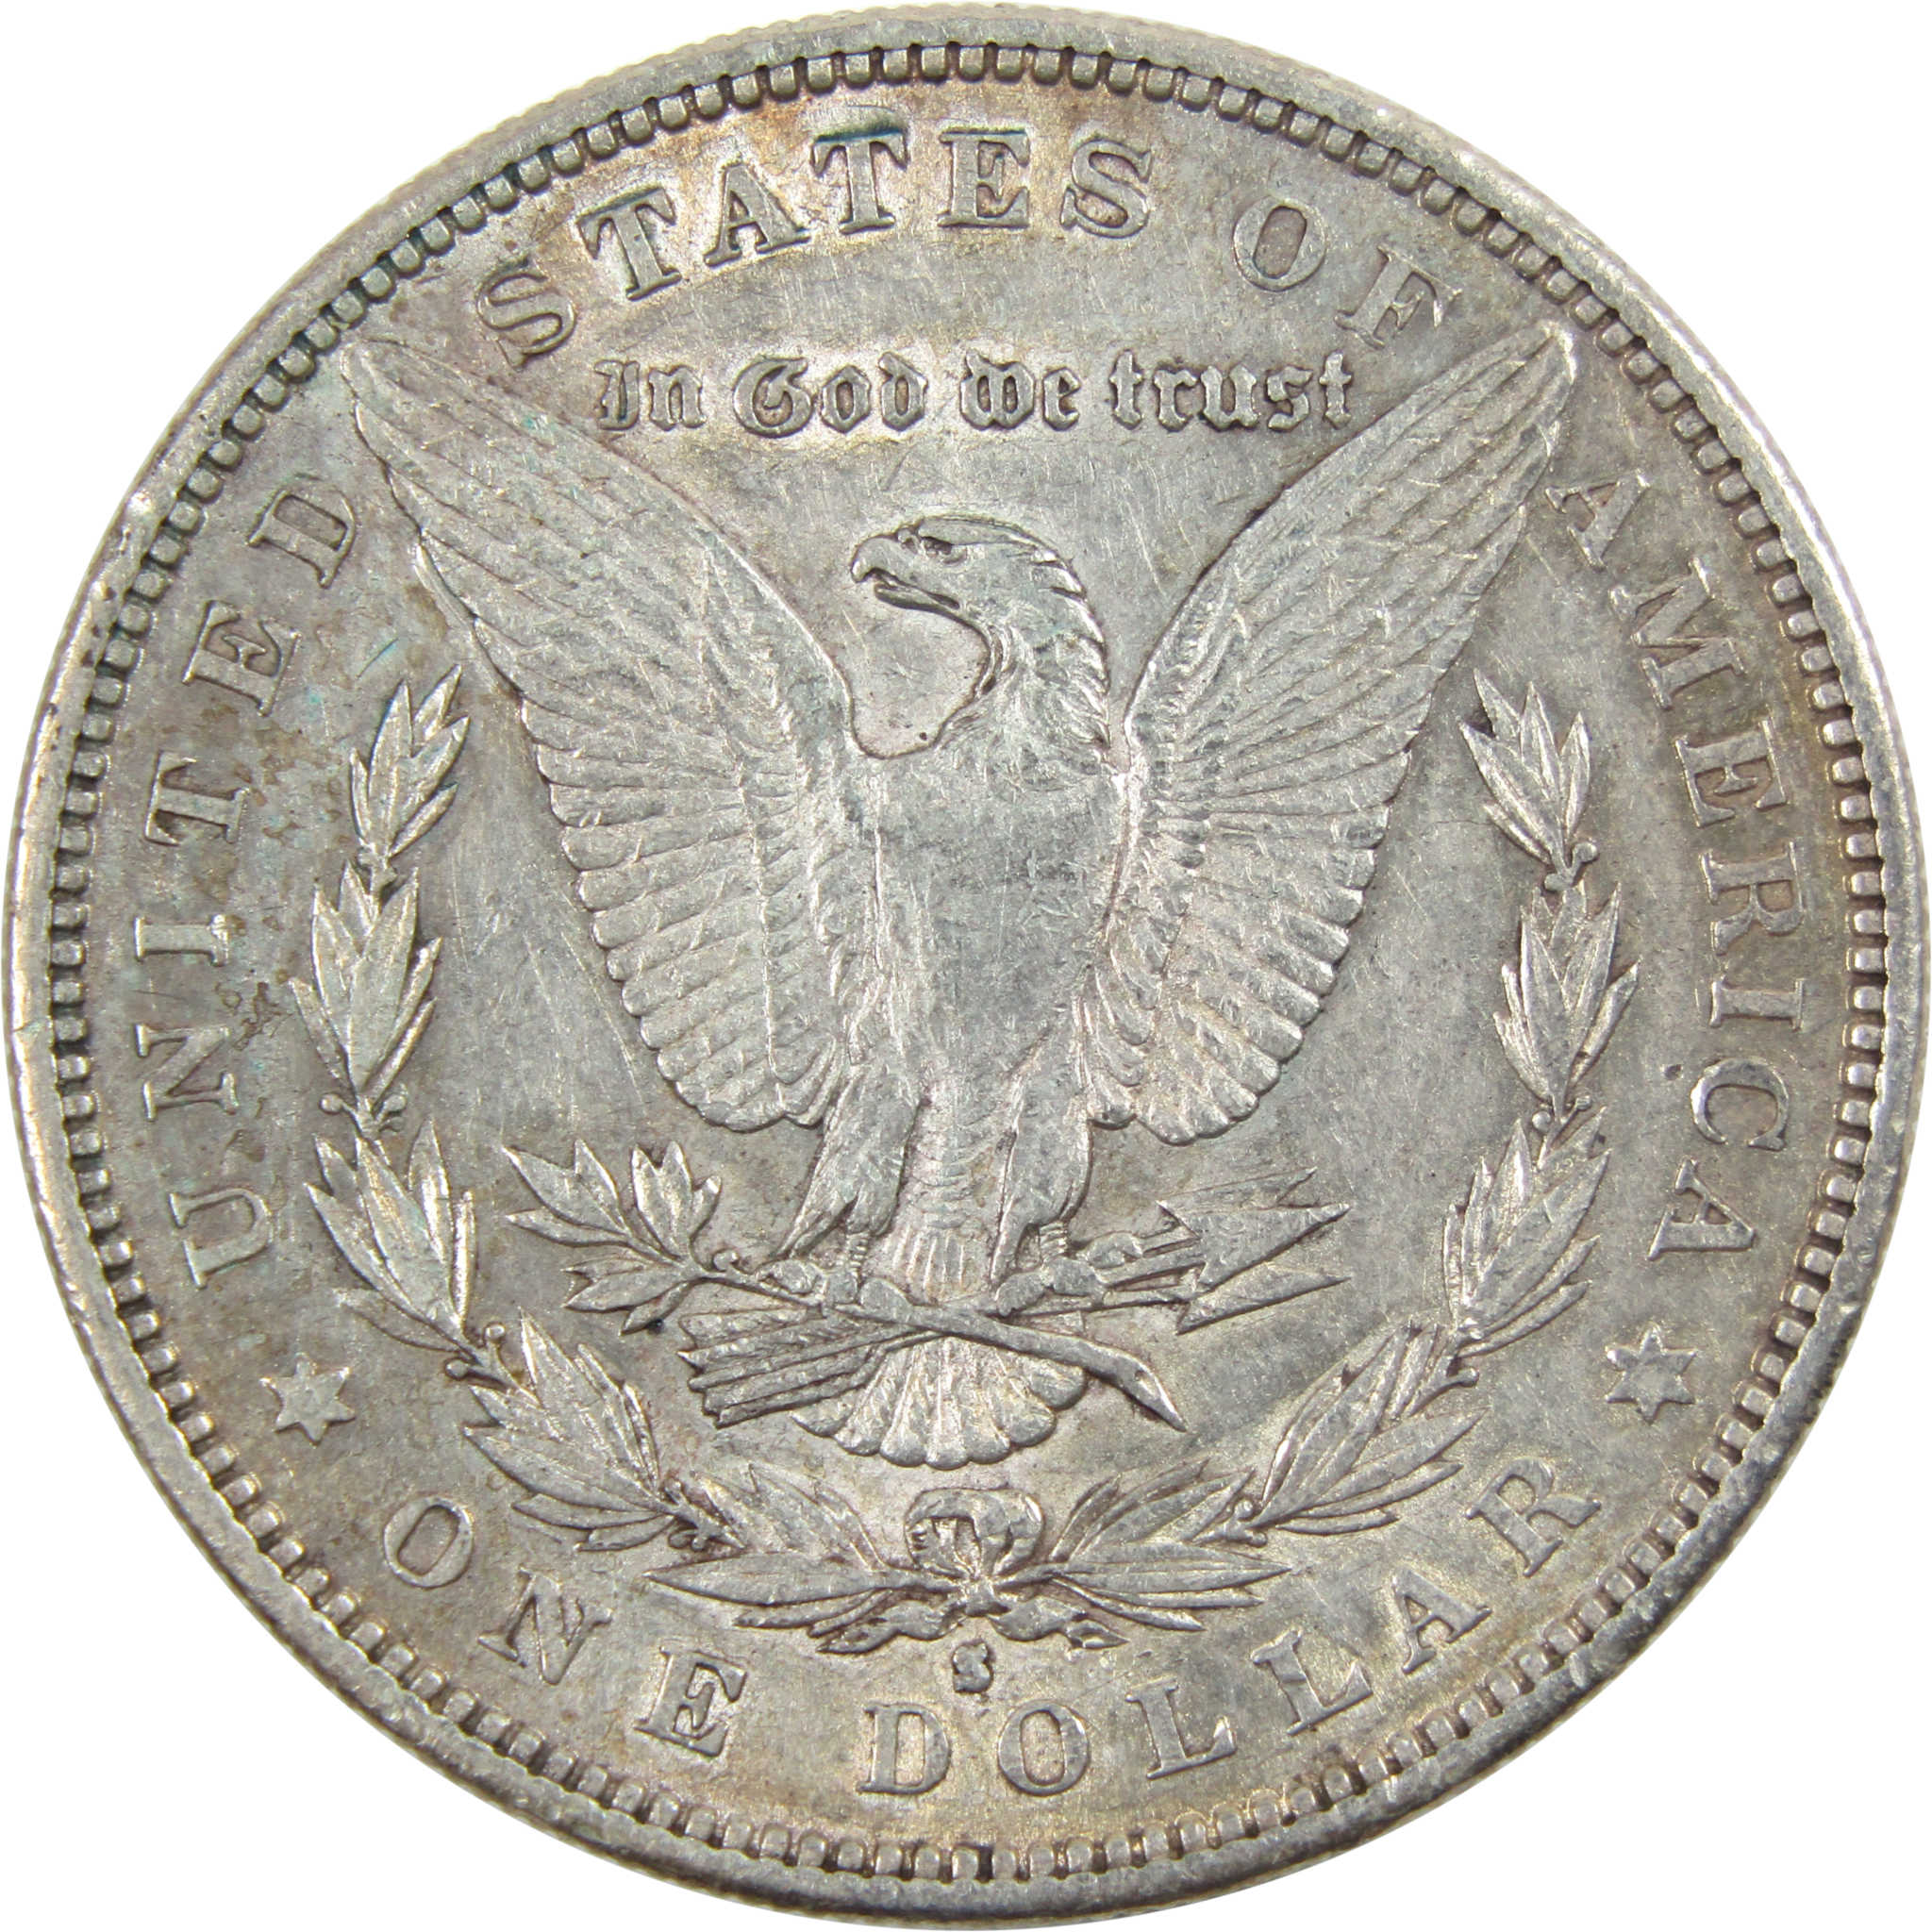 1883 S Morgan Dollar XF EF Extremely Fine Details Silver $1 SKU:I5915 - Morgan coin - Morgan silver dollar - Morgan silver dollar for sale - Profile Coins &amp; Collectibles